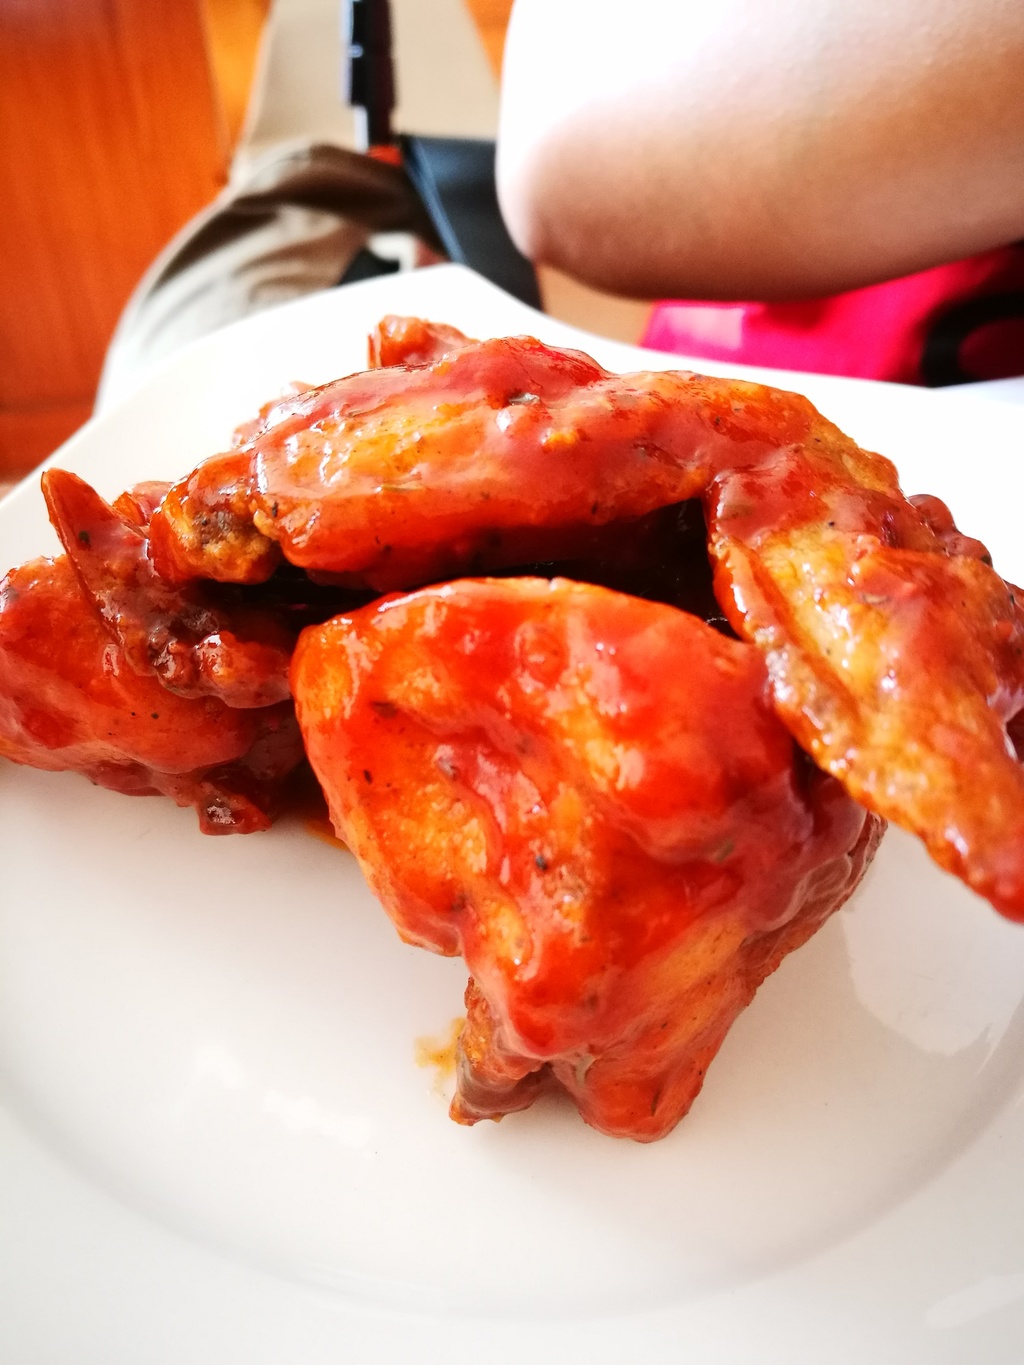 Unlimited Chicken and Shrimps at Papart's Diner and Cafe | Hey, Miss Adventures!